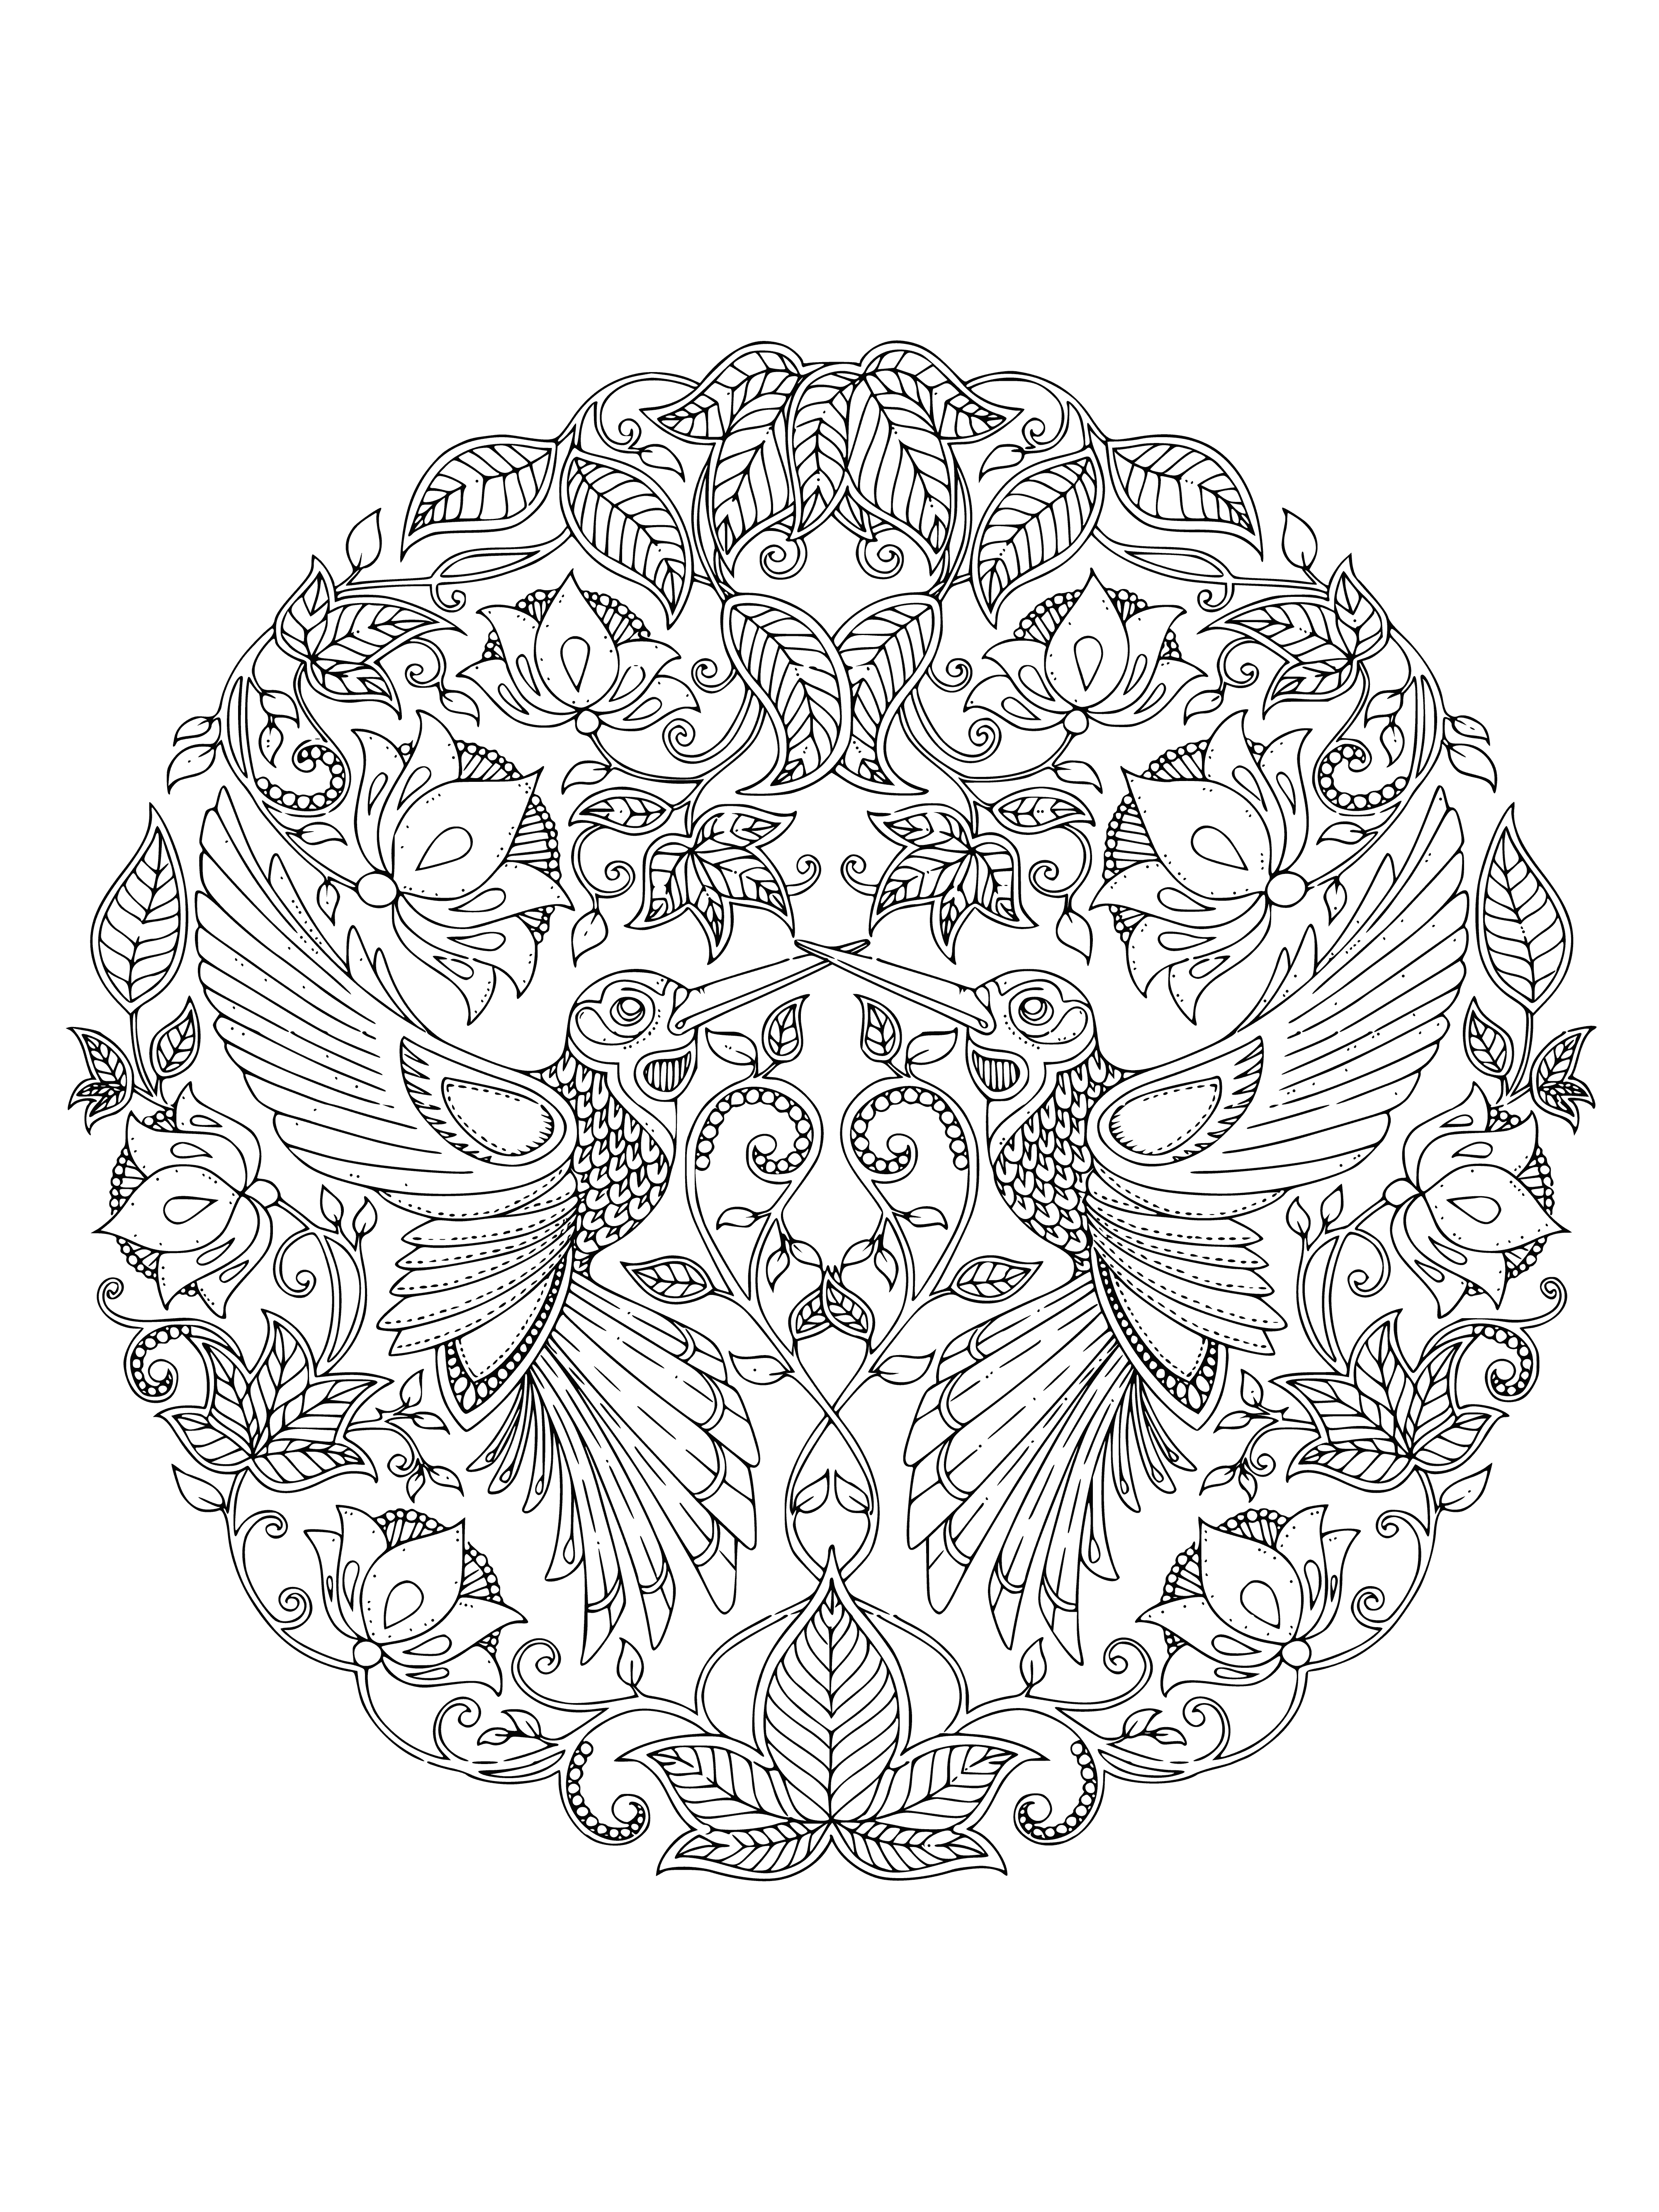 coloring page: A mandala with intricate birds and leaves creates a soothing design perfect for destressing.